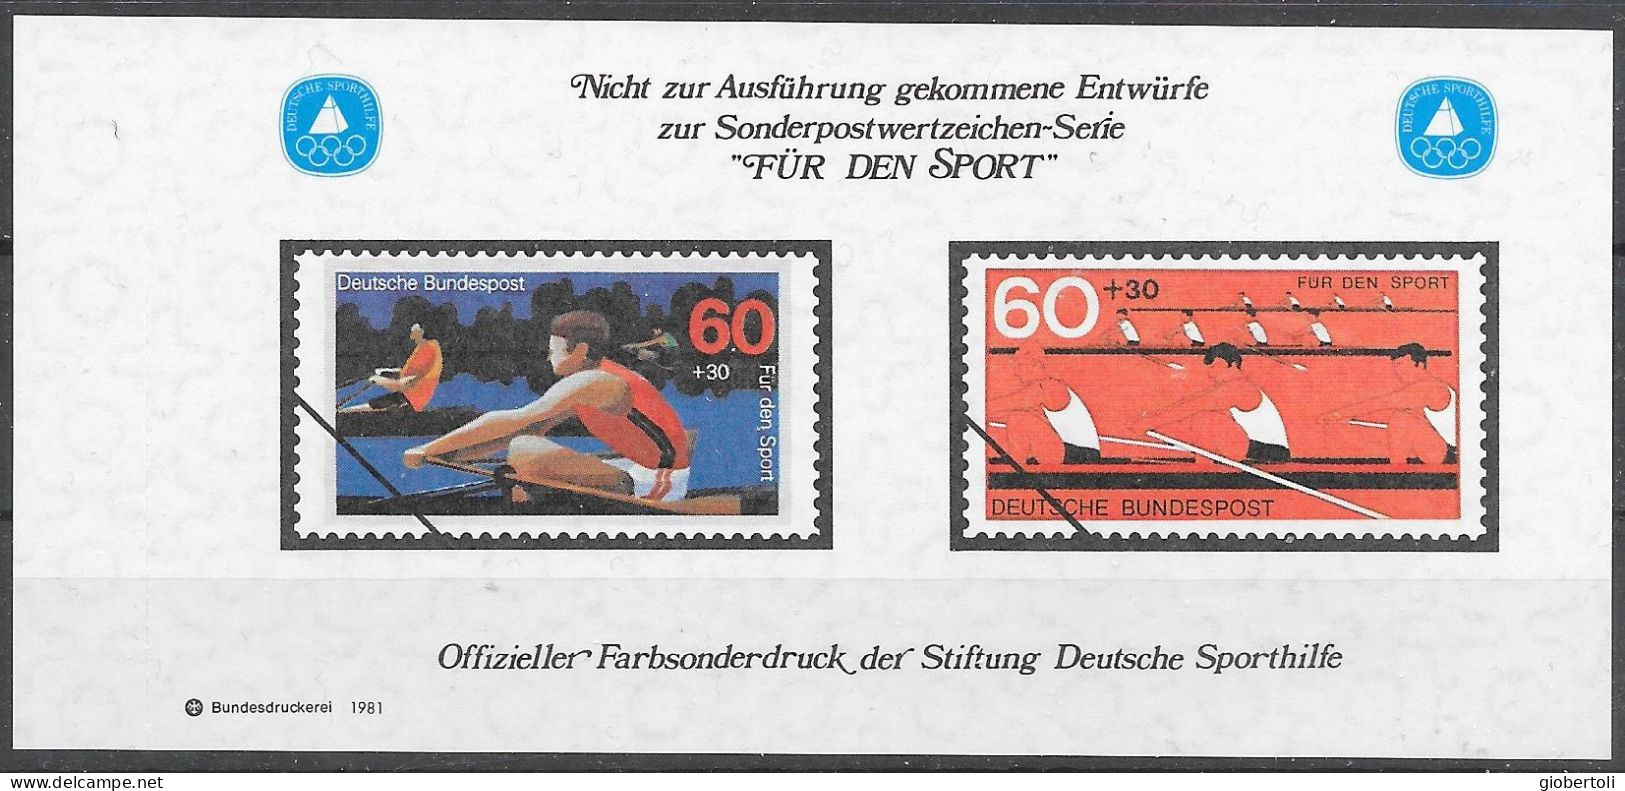 Germania/Germany/Allemagne: Bozzetti Non Adottati, Sketches Not Adopted, Croquis Non Adoptés, Per Lo Sport, For Sport, - Roeisport